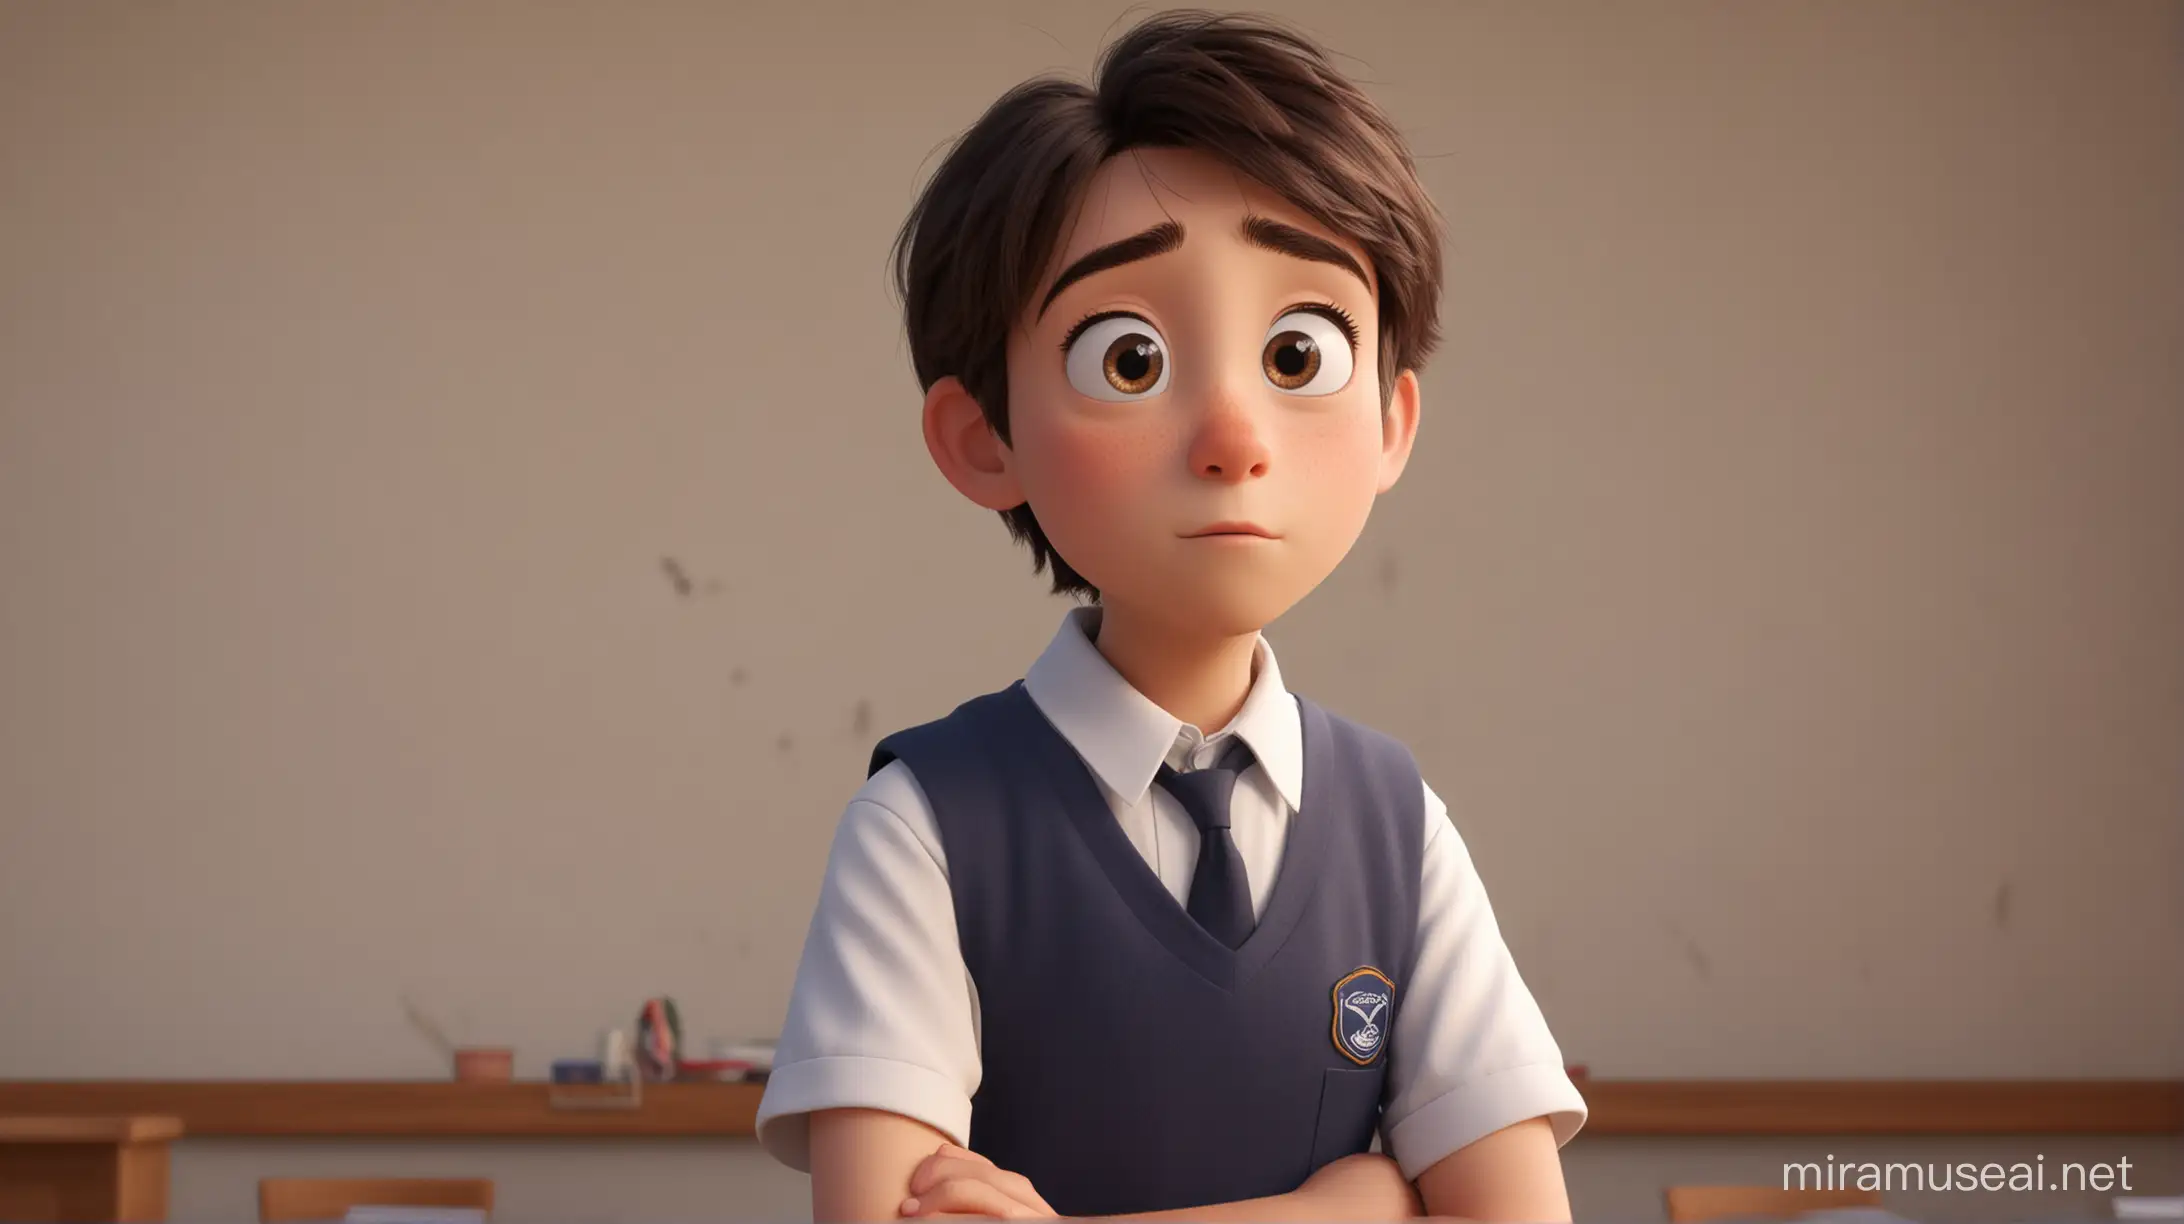 Thoughtful Student in School Uniform Contemplating with Cinematic and Pixar Style